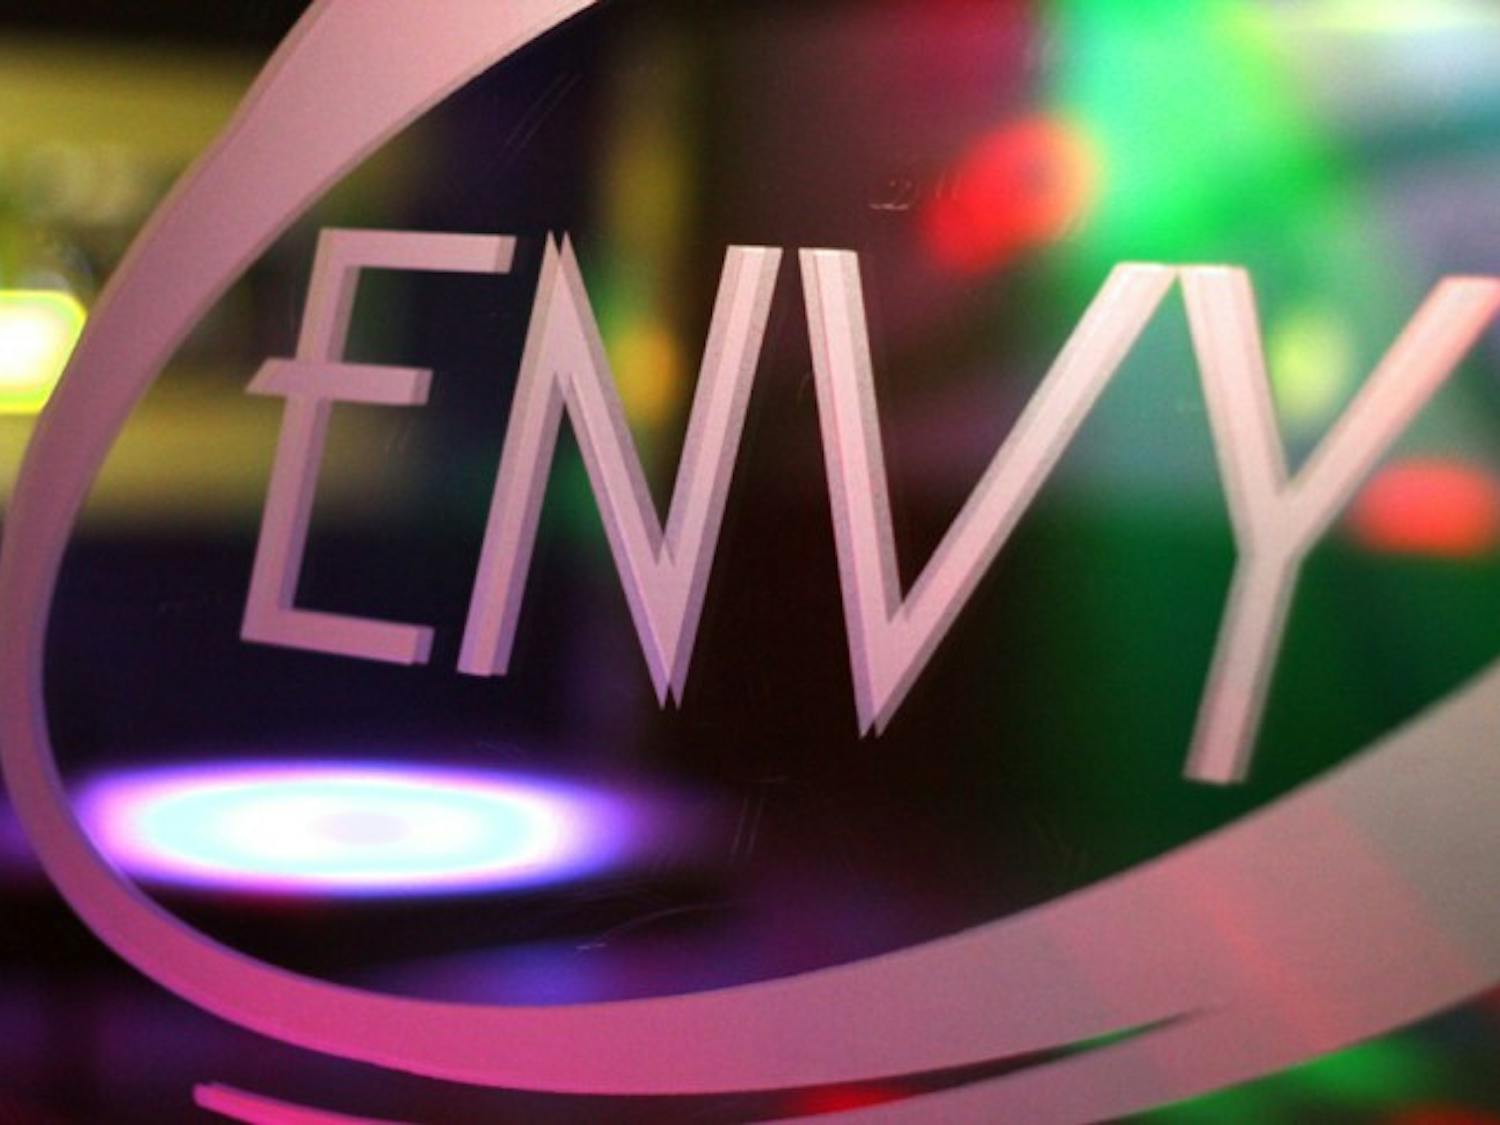 Envy, a new nightclub in Club XS’s previous location, will open for the first time tonight.